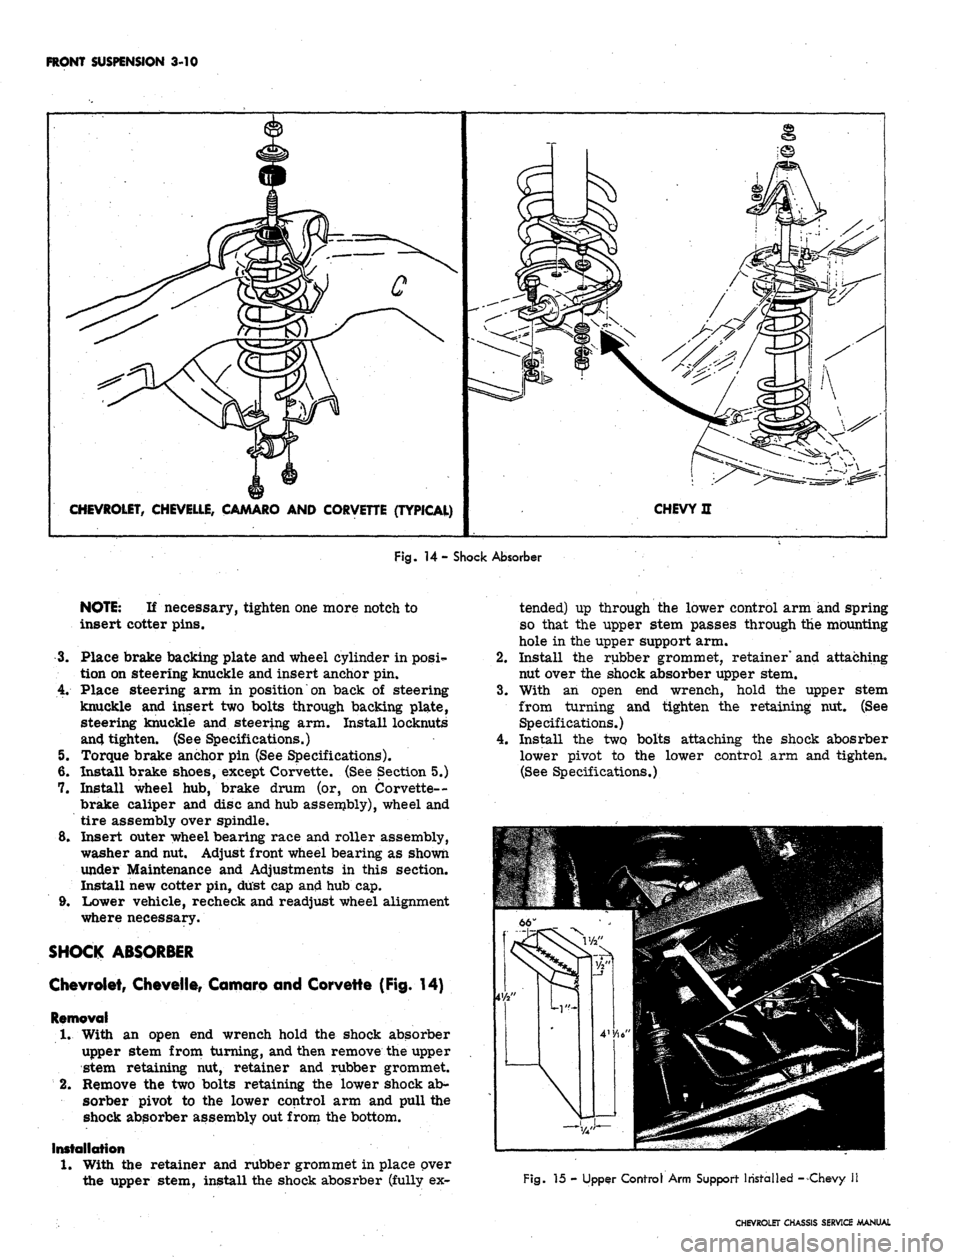 CHEVROLET CAMARO 1967 1.G Chassis User Guide 
FRONT SUSPENSION 3-10

CHEVROLET, CHEVELLE, CAMARO AND CORVETTE (TYPICAL) 
CHEVY H

Fig.
 14- Shock Absorber

NOTE:
 If necessary, tighten one more notch to

insert cotter pins.

3.
 Place brake back